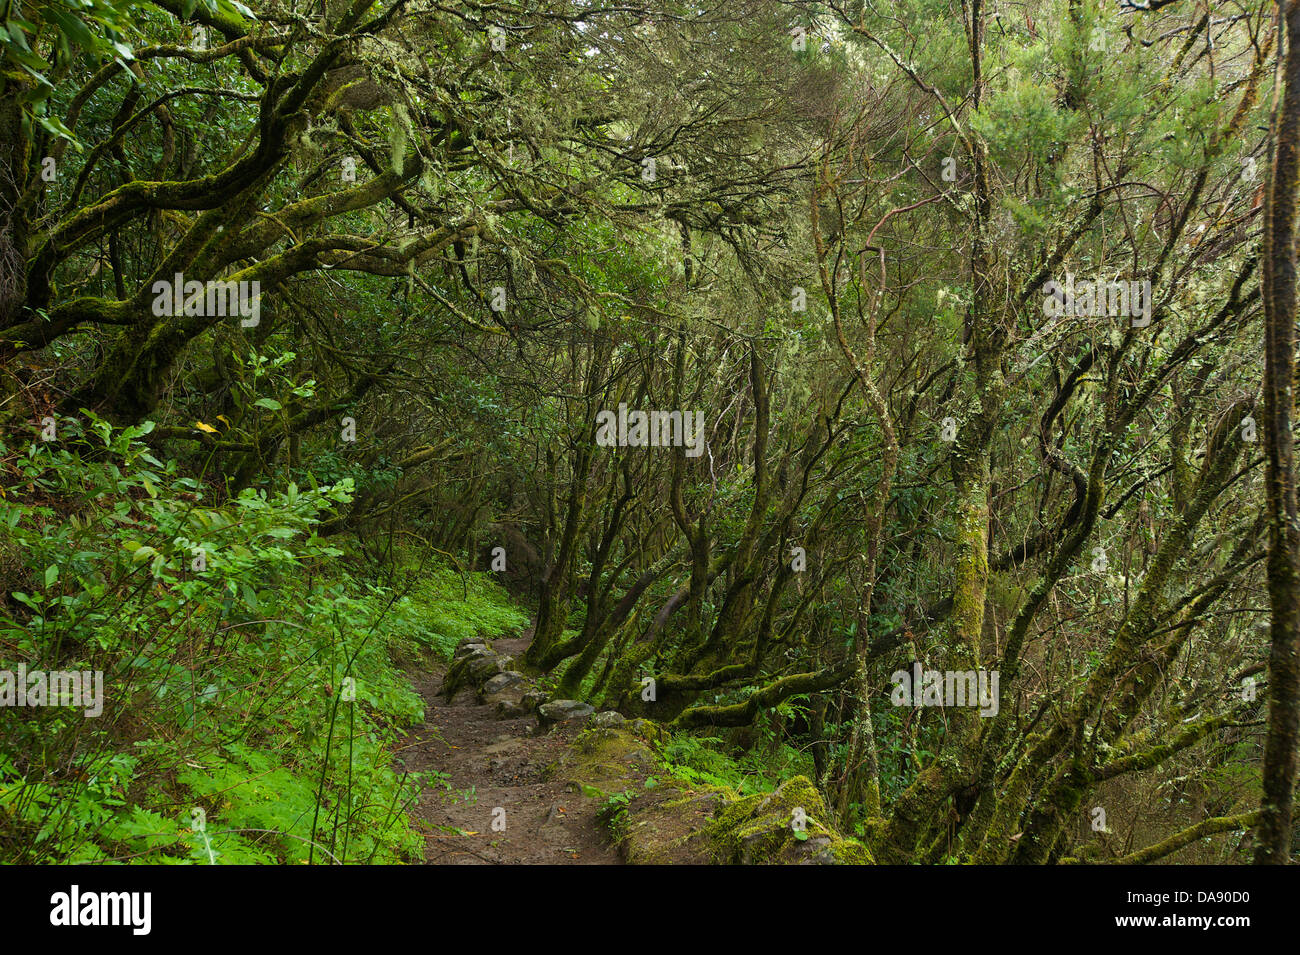 Canaries, Europe, Canary islands, La Gomera, Spain, outside, day, nobody, laurel wood, wood, forest, national park, national par Stock Photo